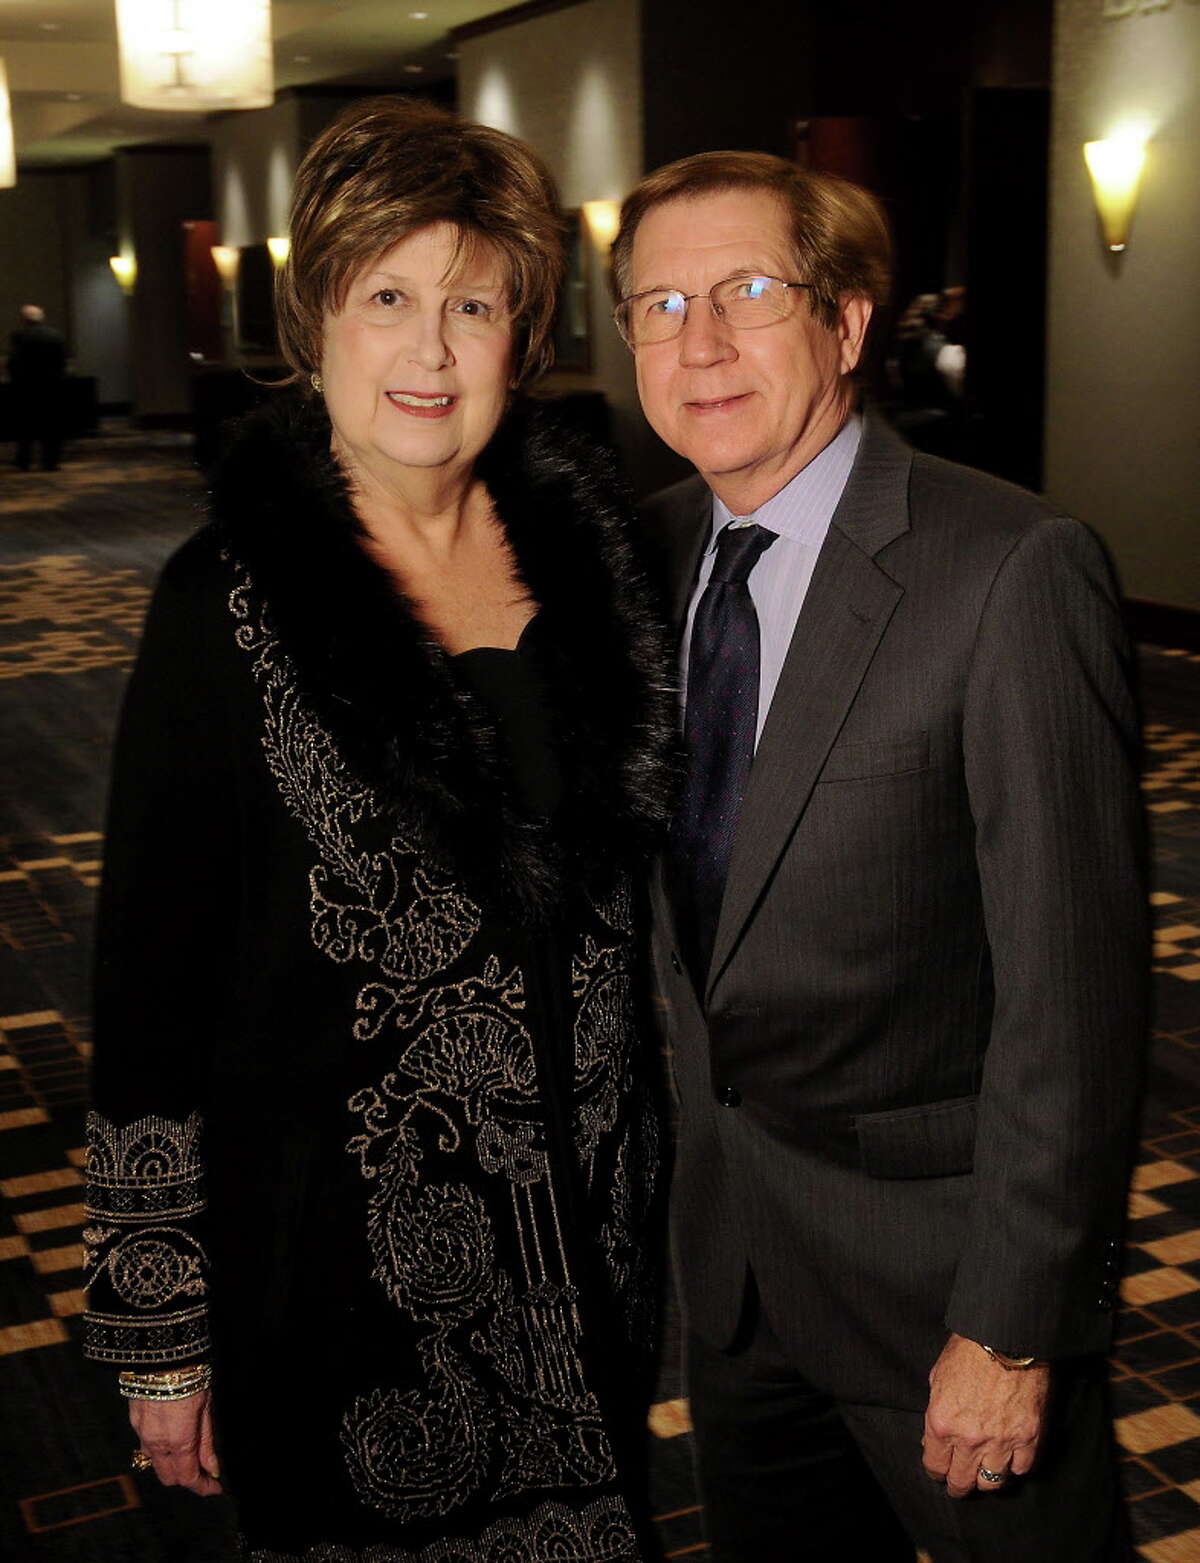 JoDee and Cliff Wright at Spec's annual Virtuoso Gala at the Royal Sonesta Hotel Wednesday Dec. 06,2017. (Dave Rossman Photo)